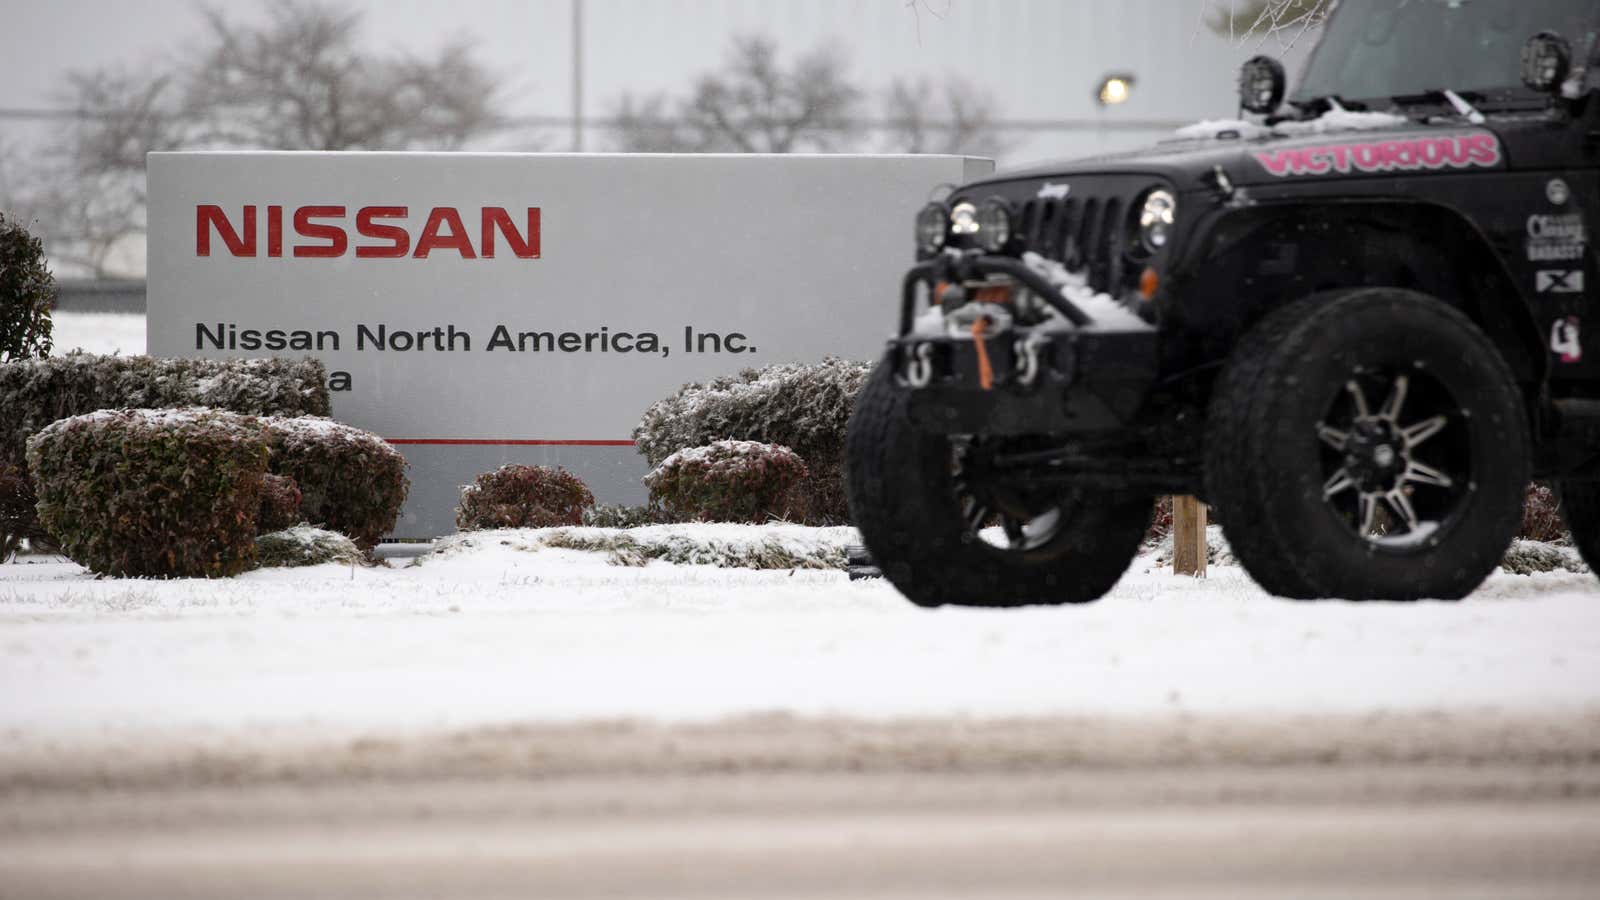 The Nissan manufacturing facility in Smyrna, Tennessee.